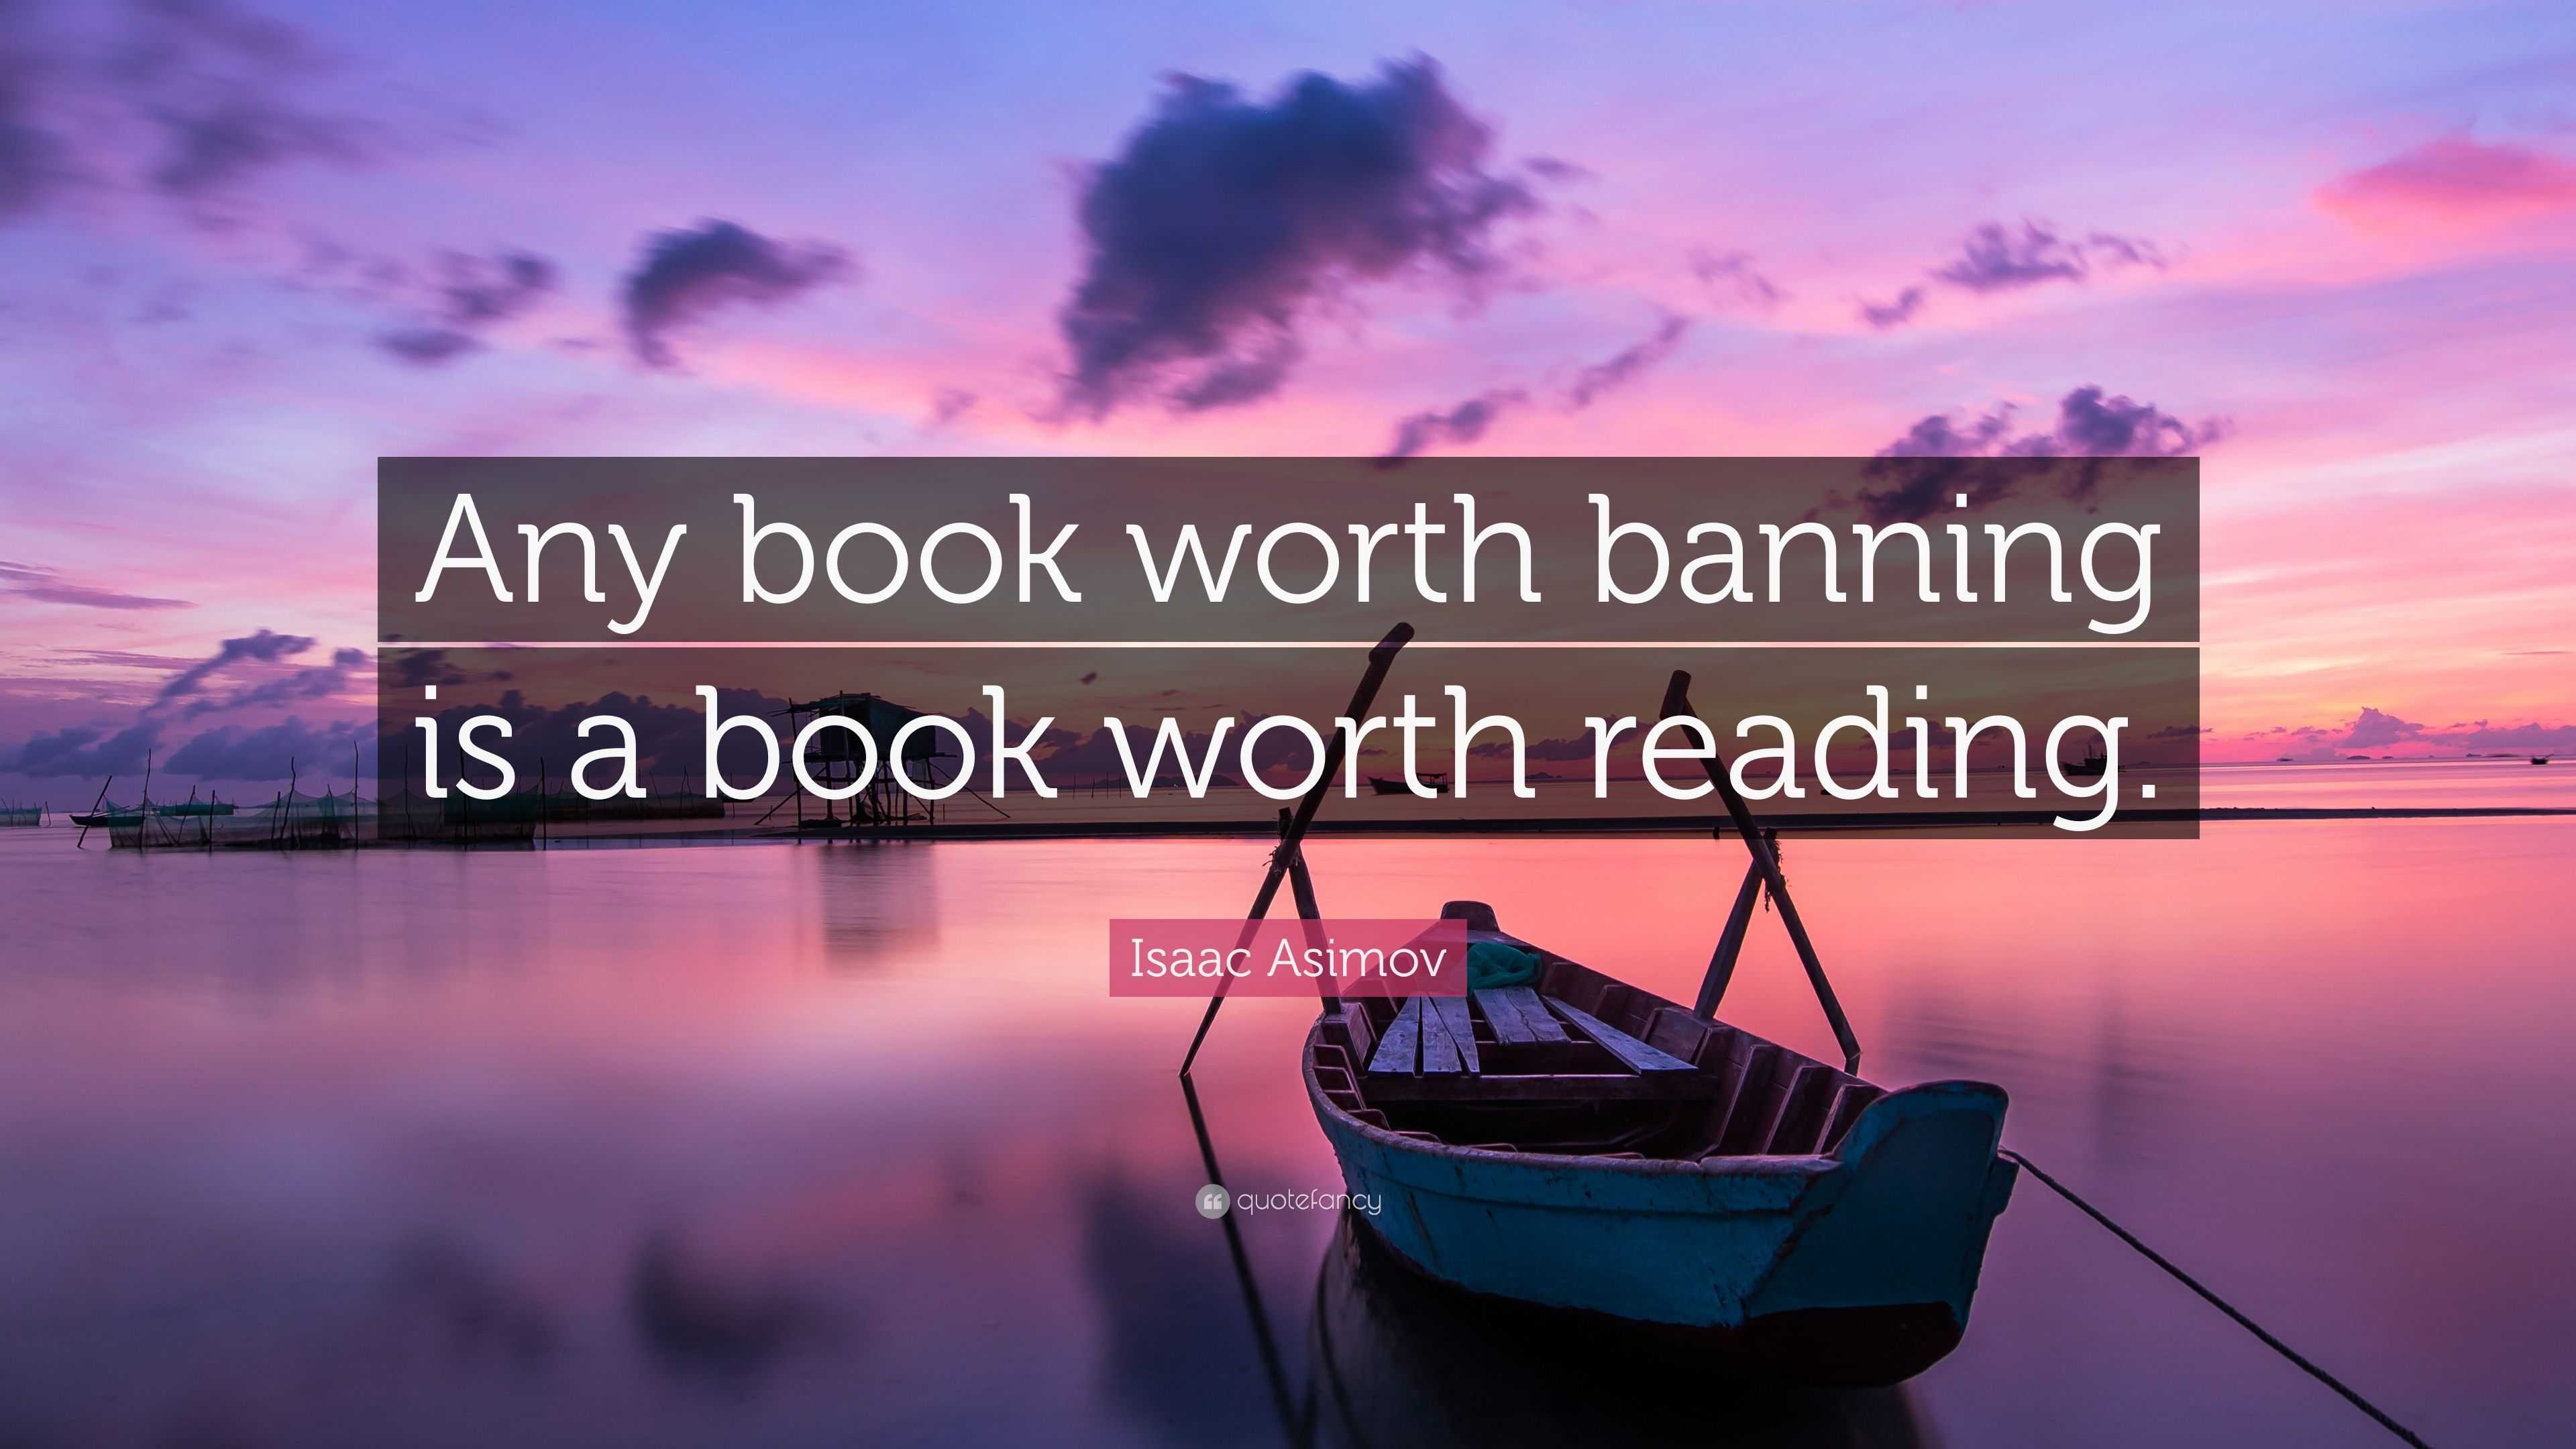 Isaac Asimov Quote: “Any book worth banning is a book worth reading.”